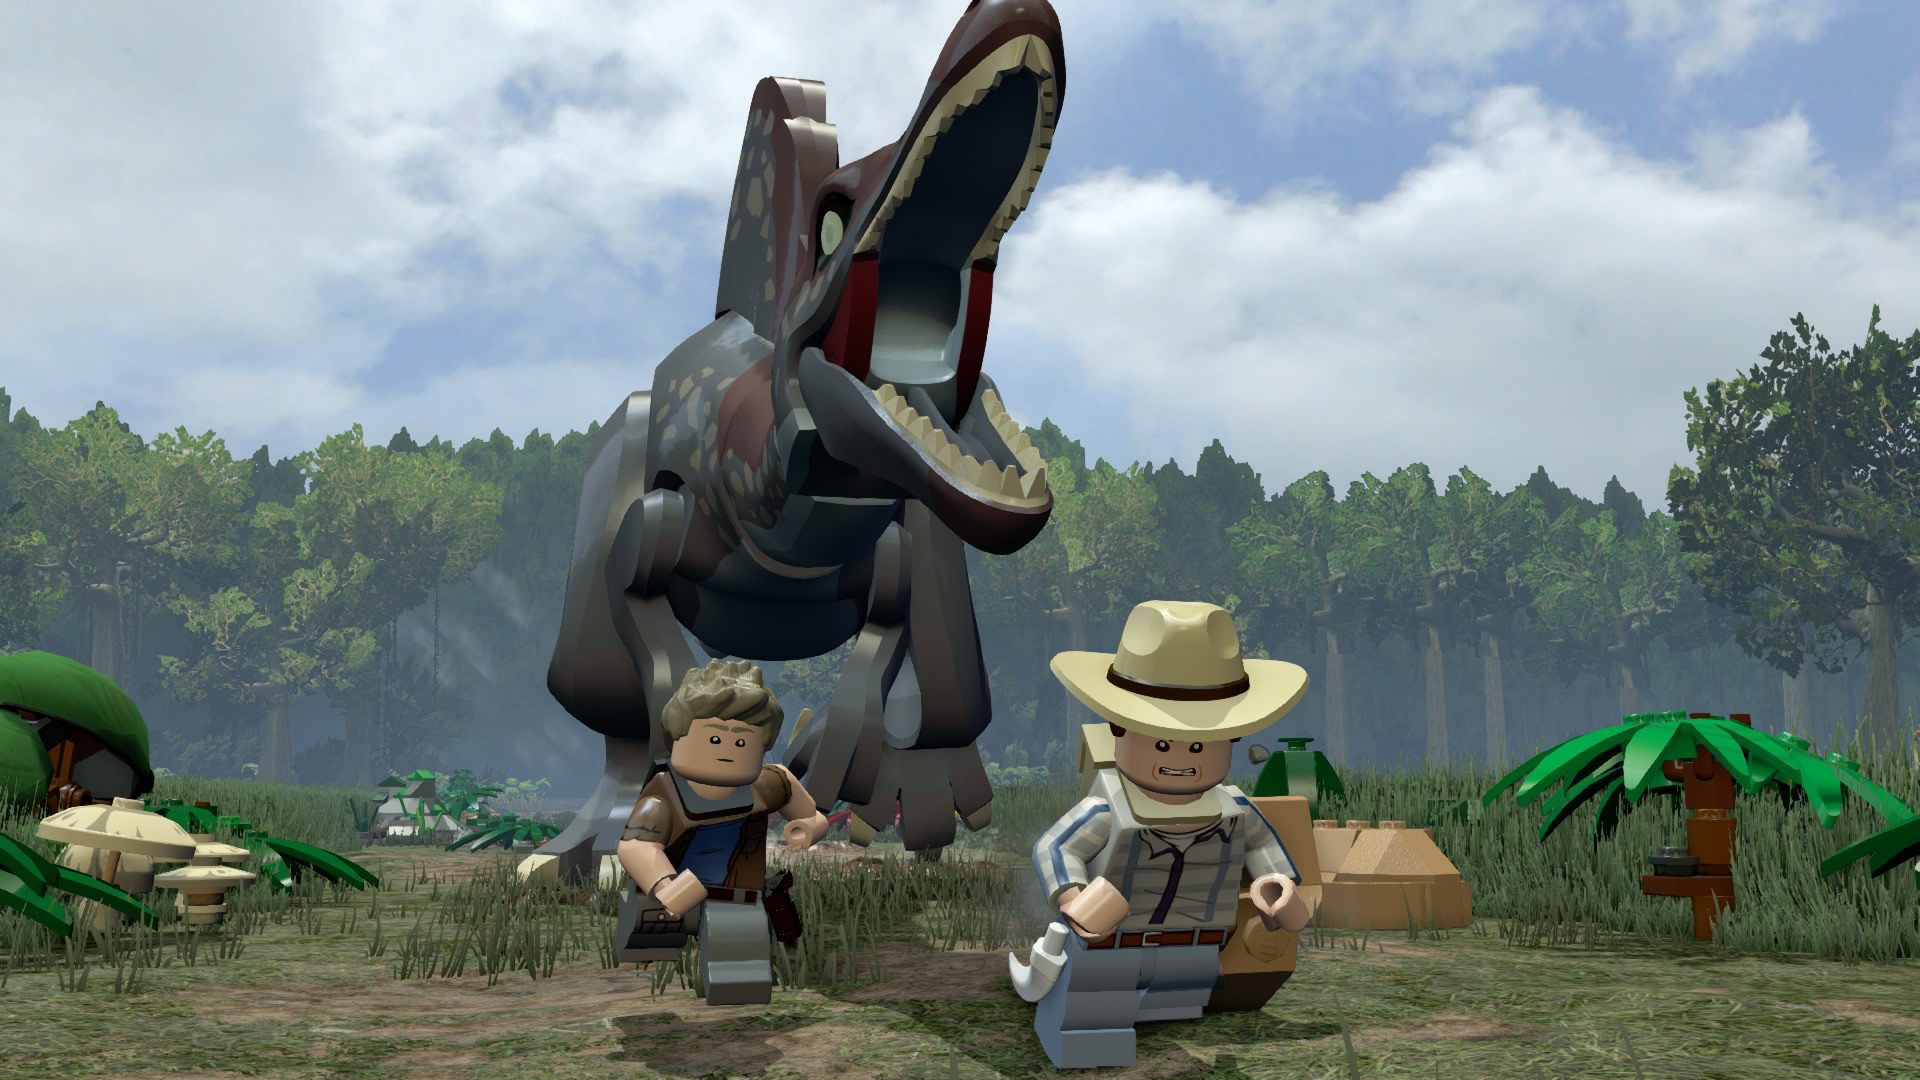 best lego games: a giant lego dinosaur is chasing two characters